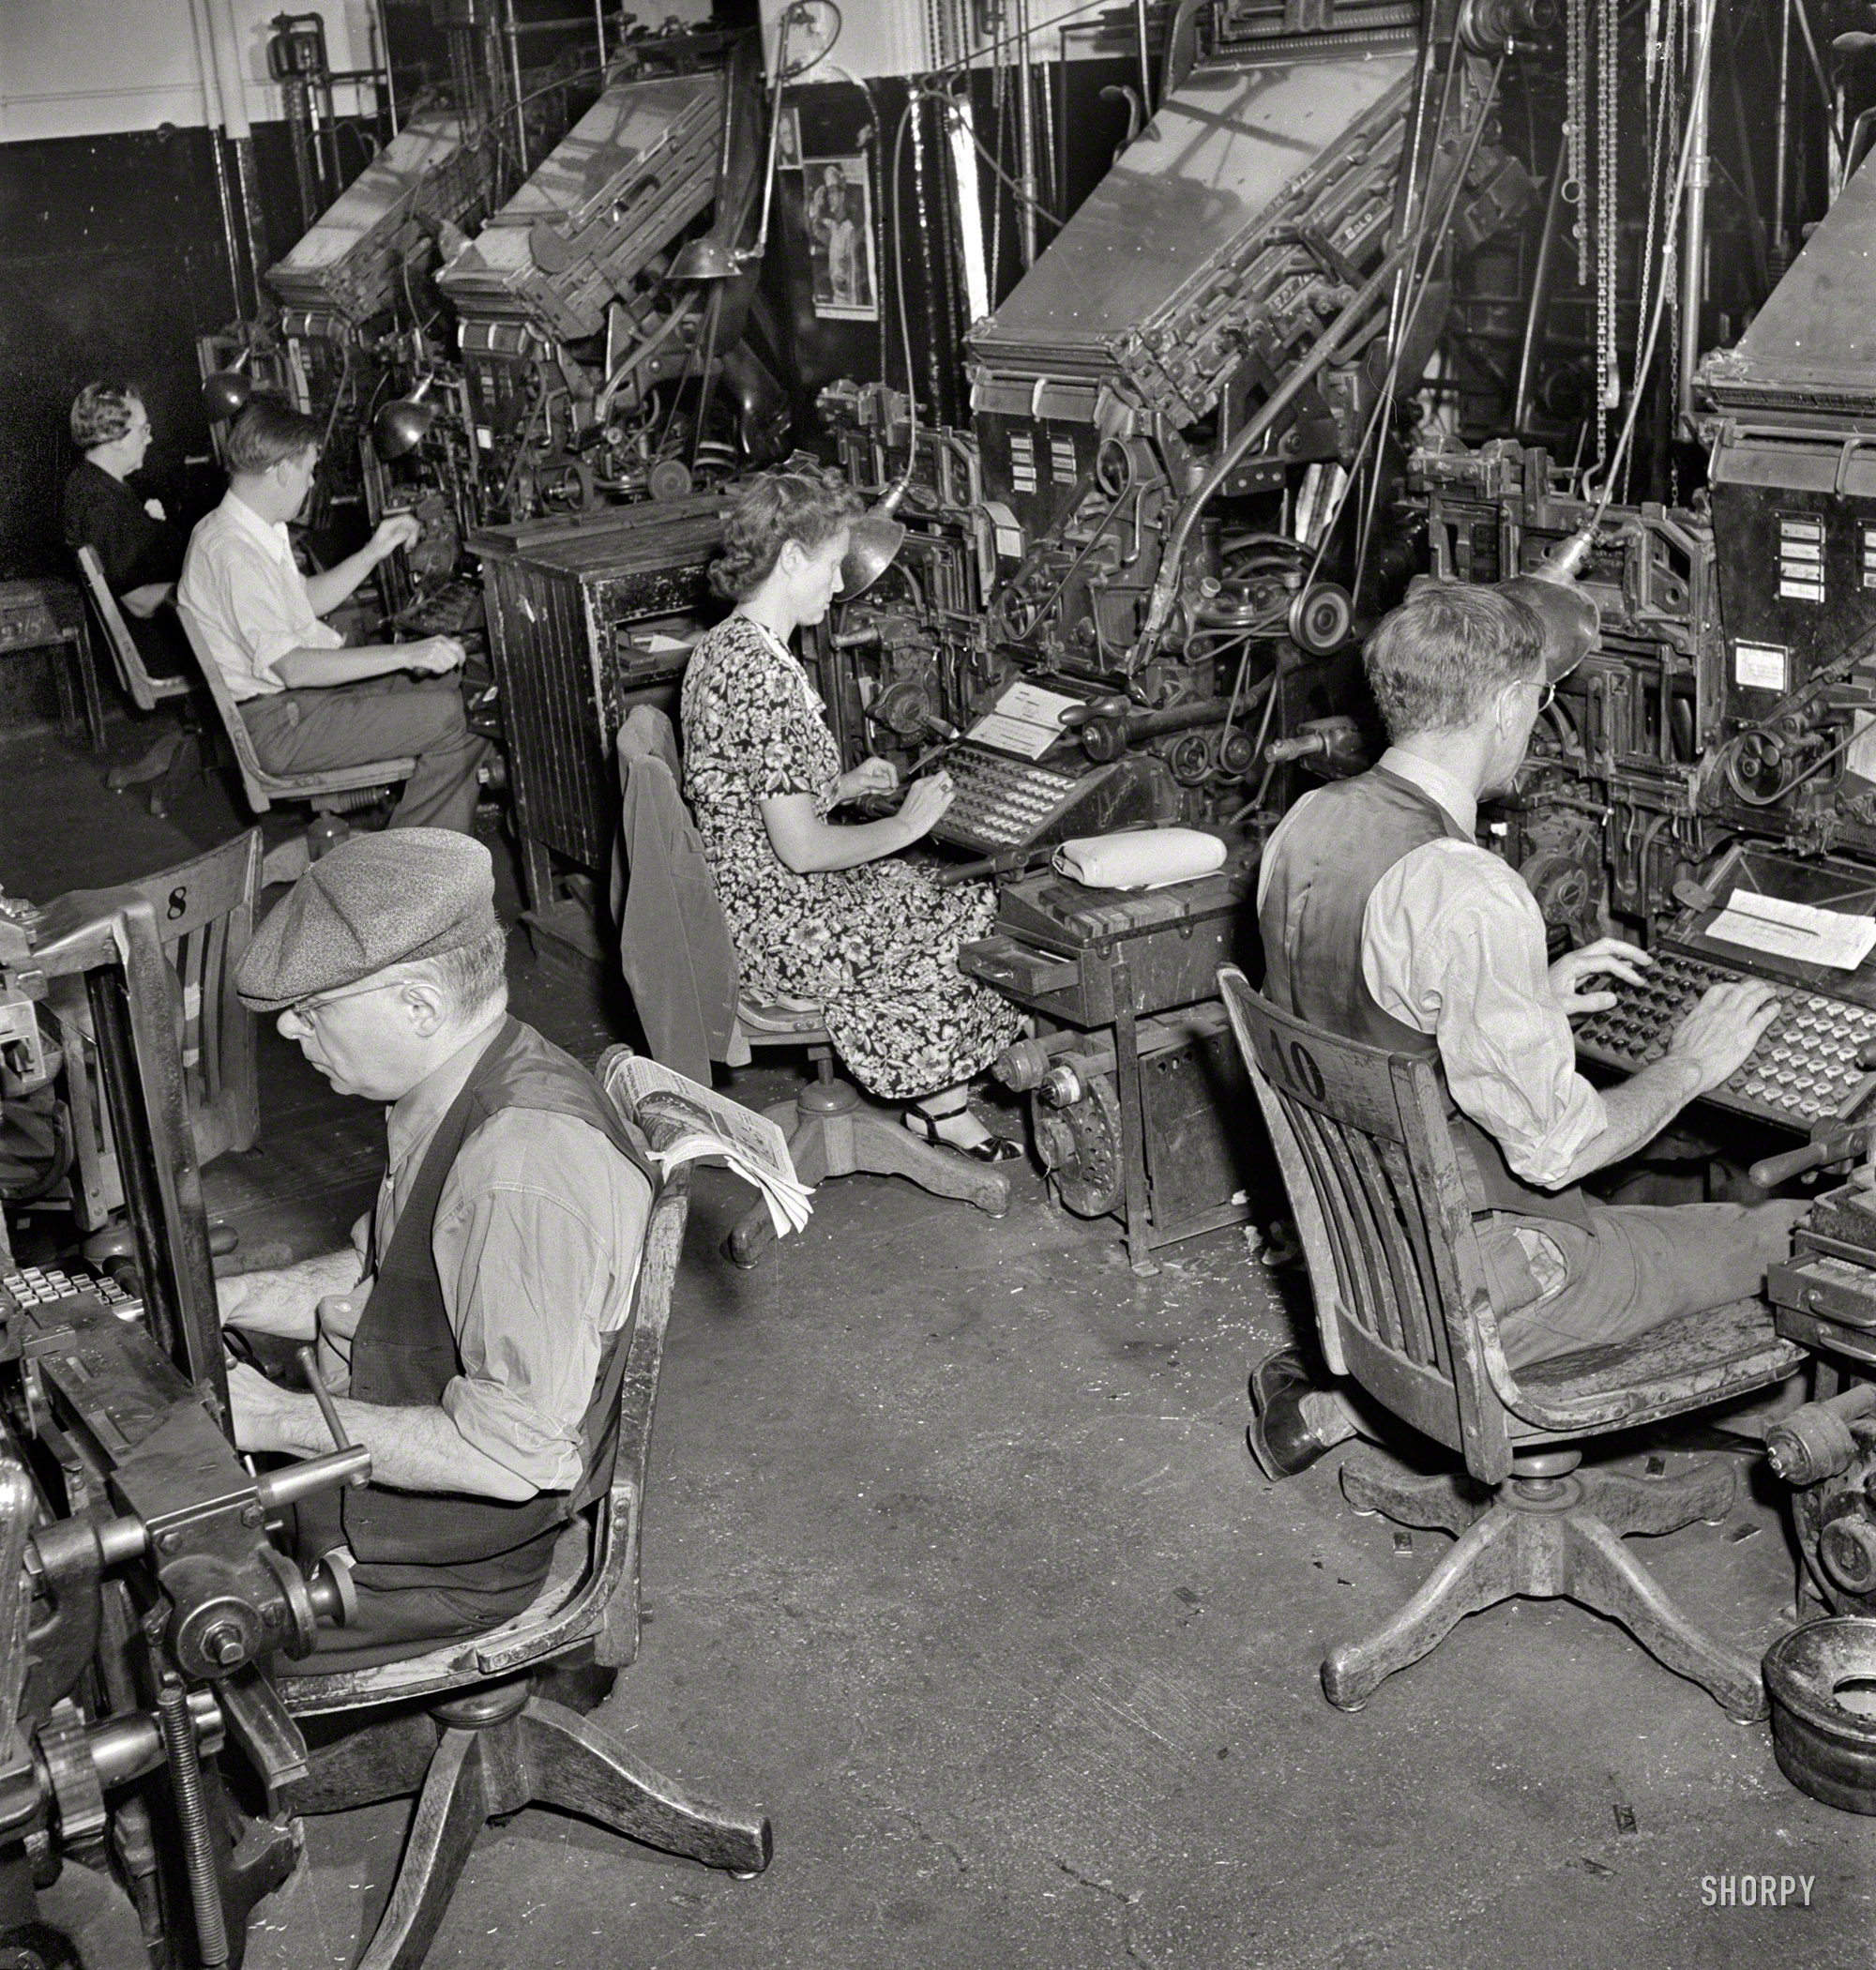 September 1942. "Linotype operators in composing room of the New York Times newspaper." These machines cast lines of type (Linotype) from molten lead prior to their assembly by compositors into the printing plates that go on the presses. Photo by Marjory Collins for the Office of War Information. View full size.